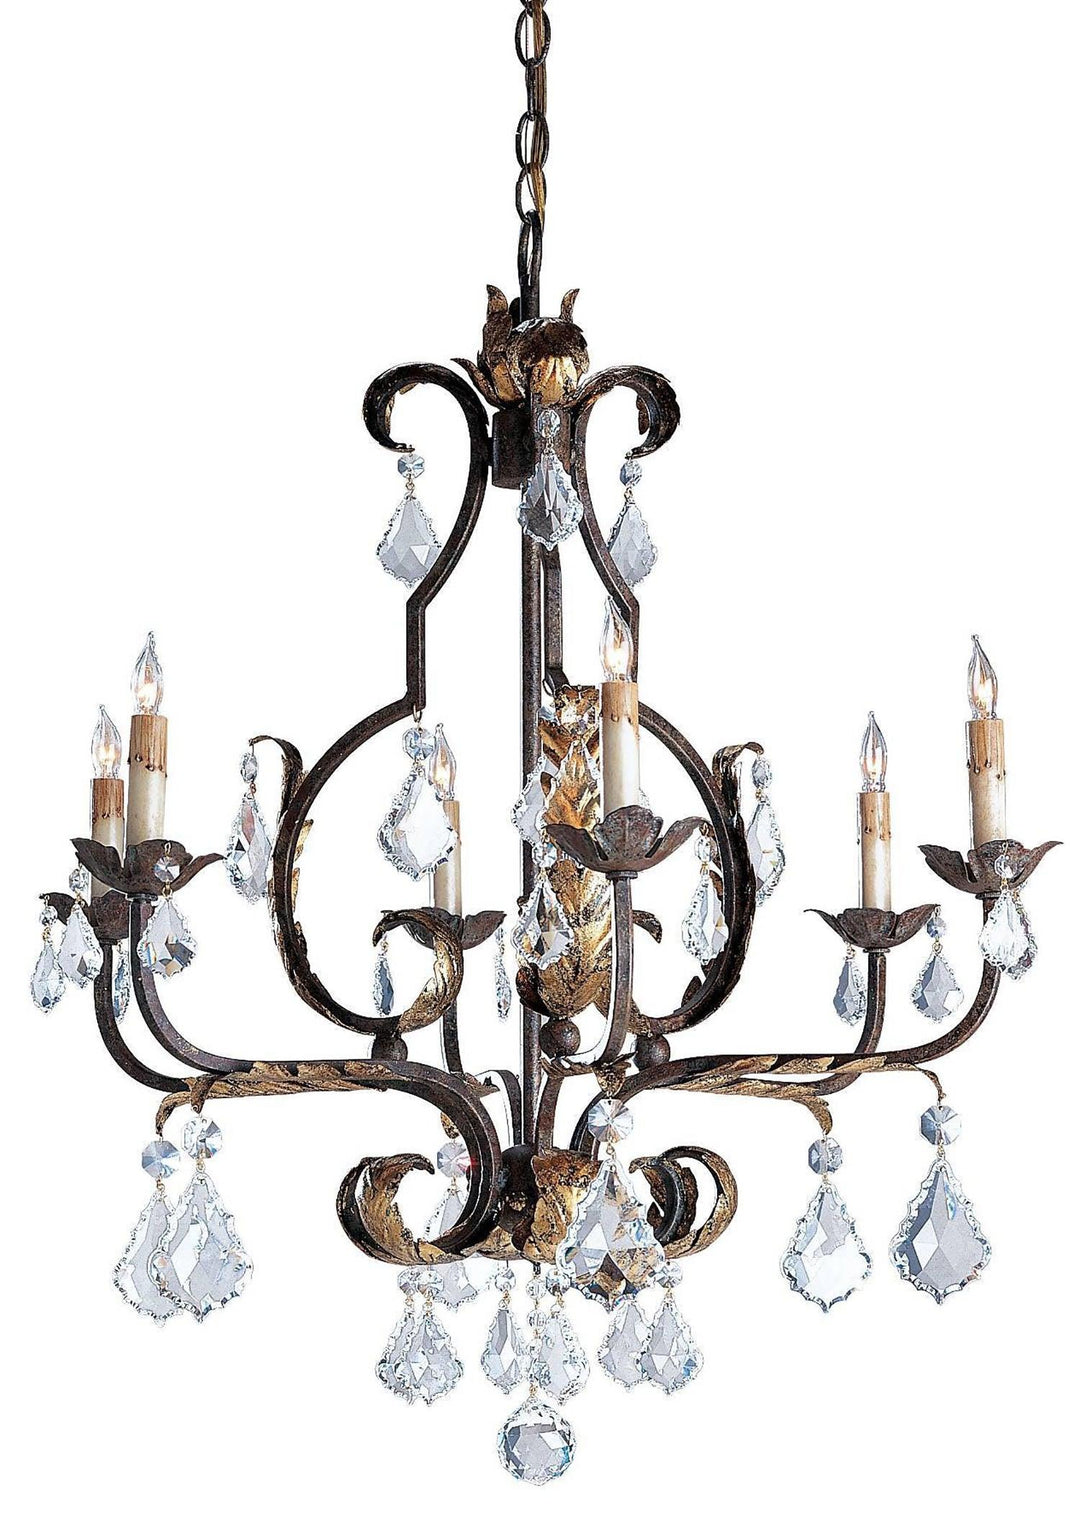 Tuscan Large Chandelier - Casey & Company